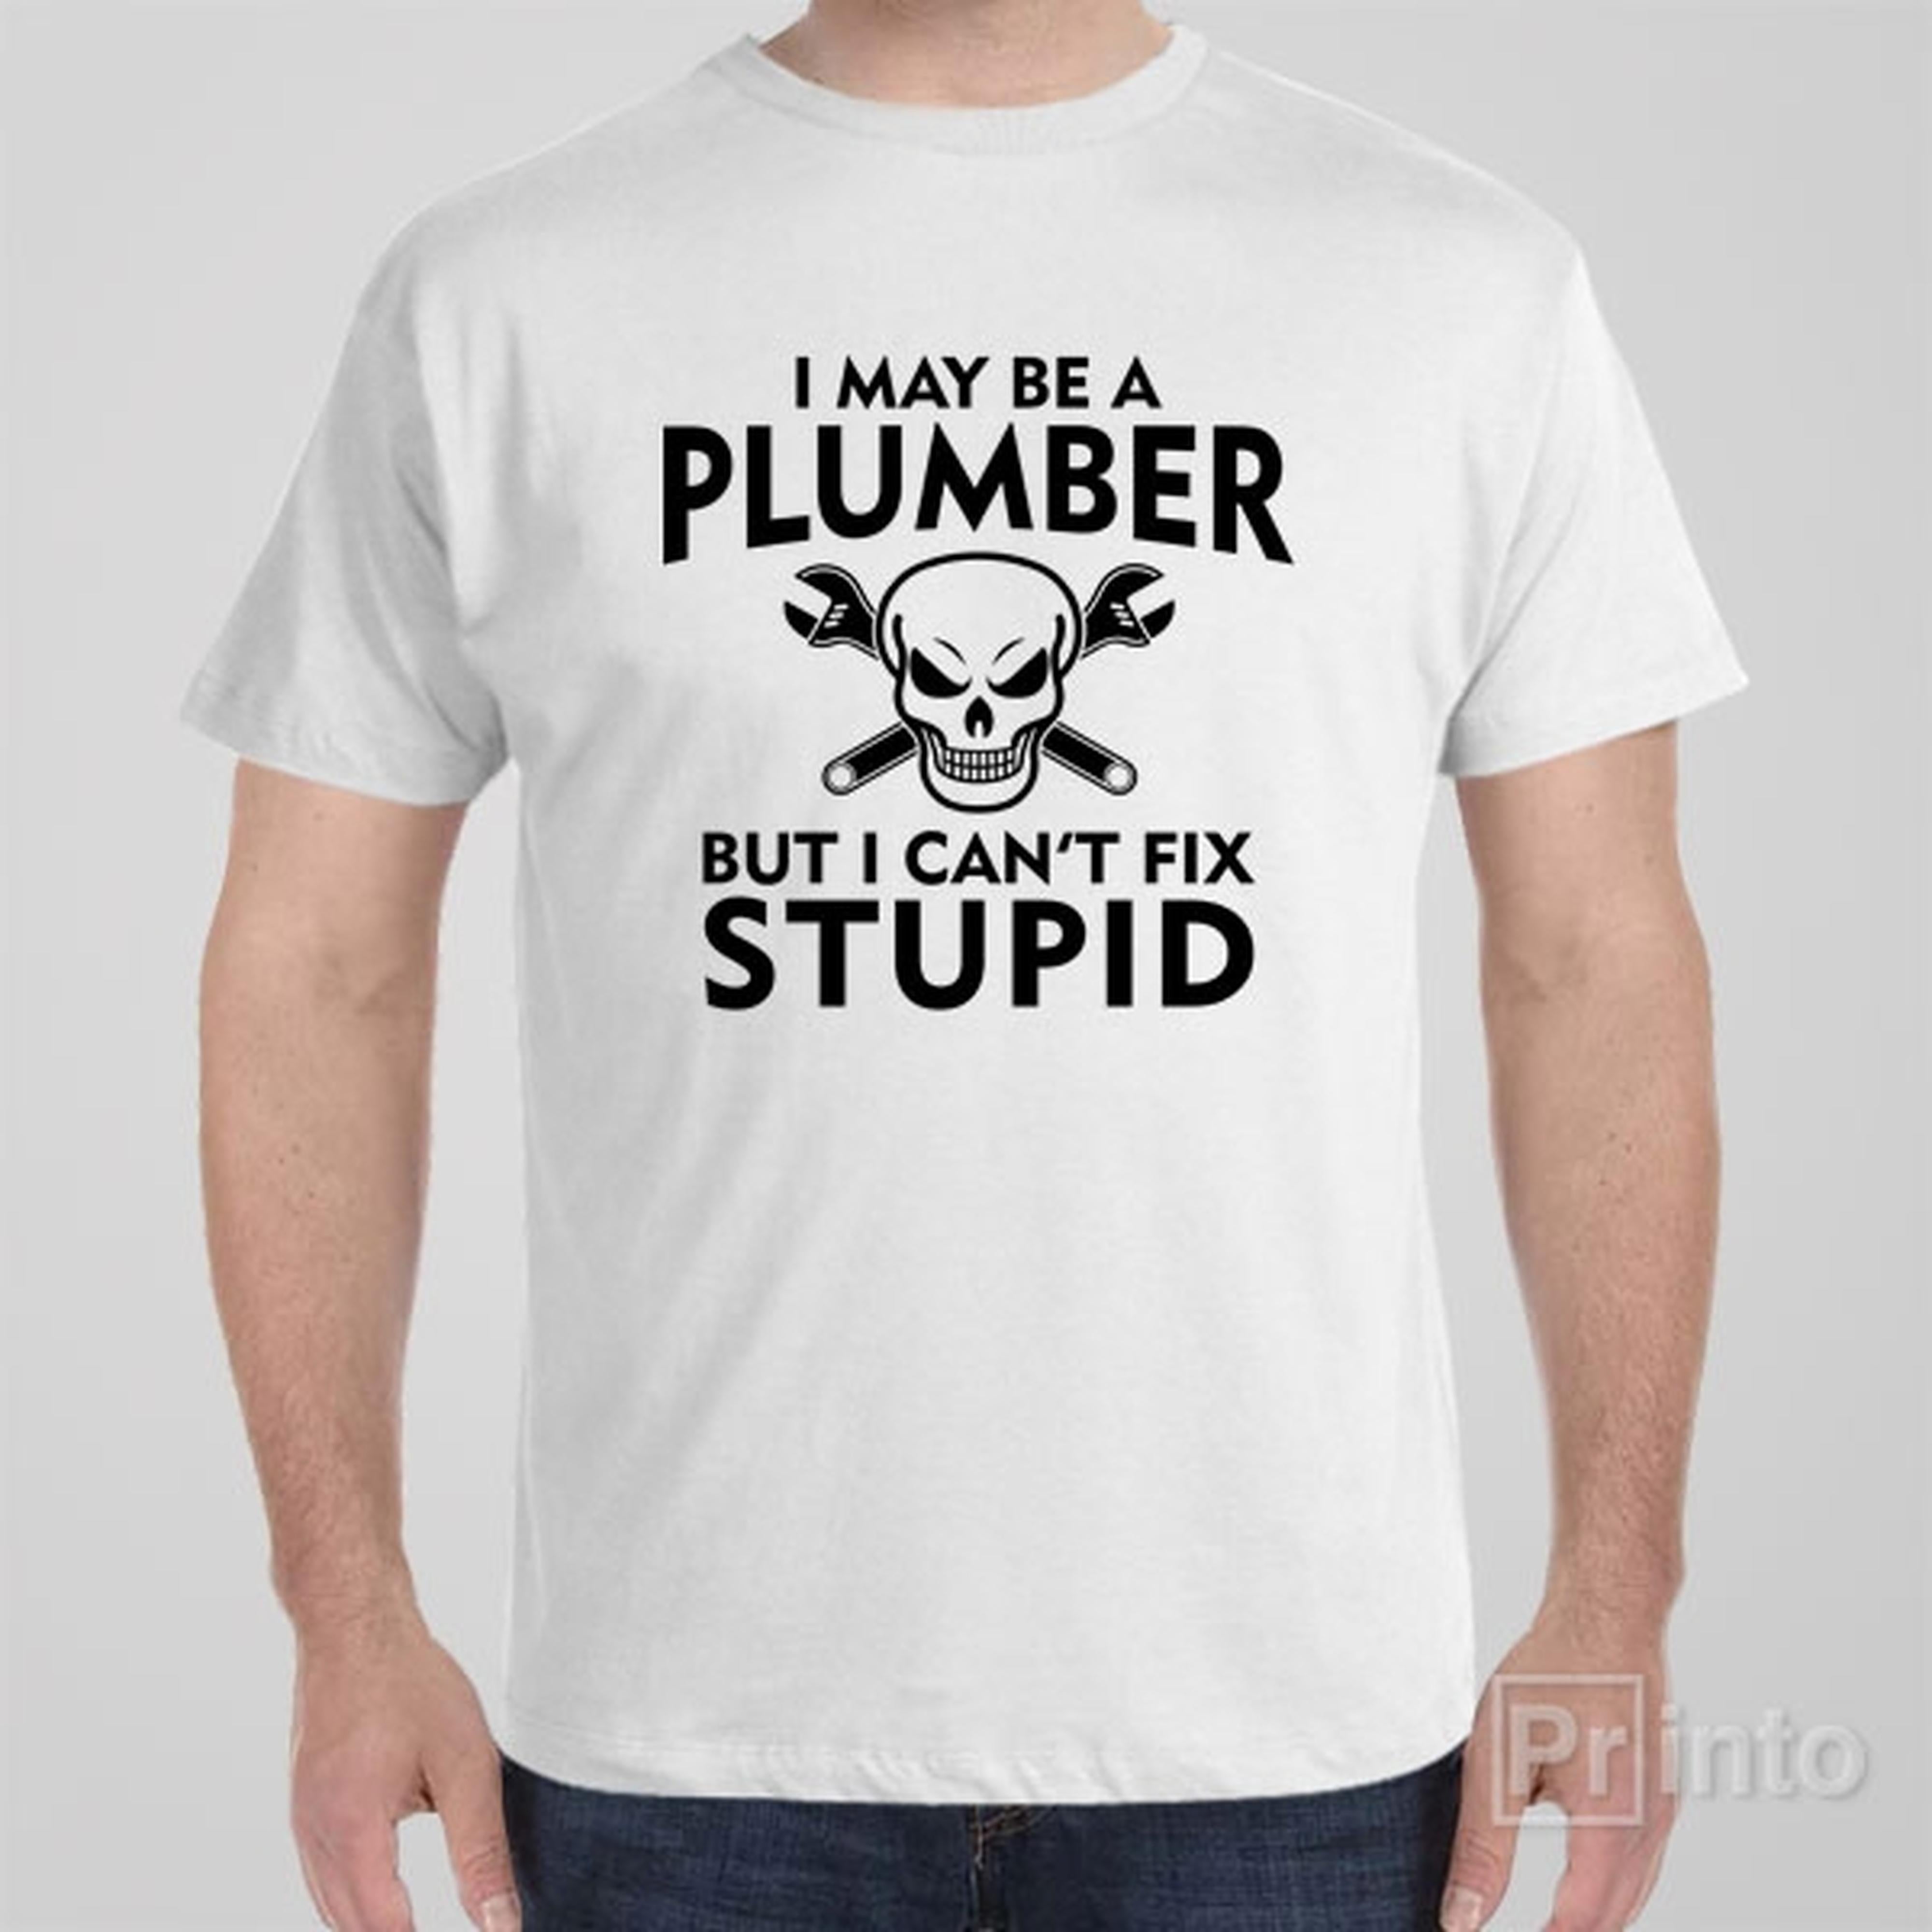 i-may-be-a-plumber-but-i-cant-fix-stupid-t-shirt